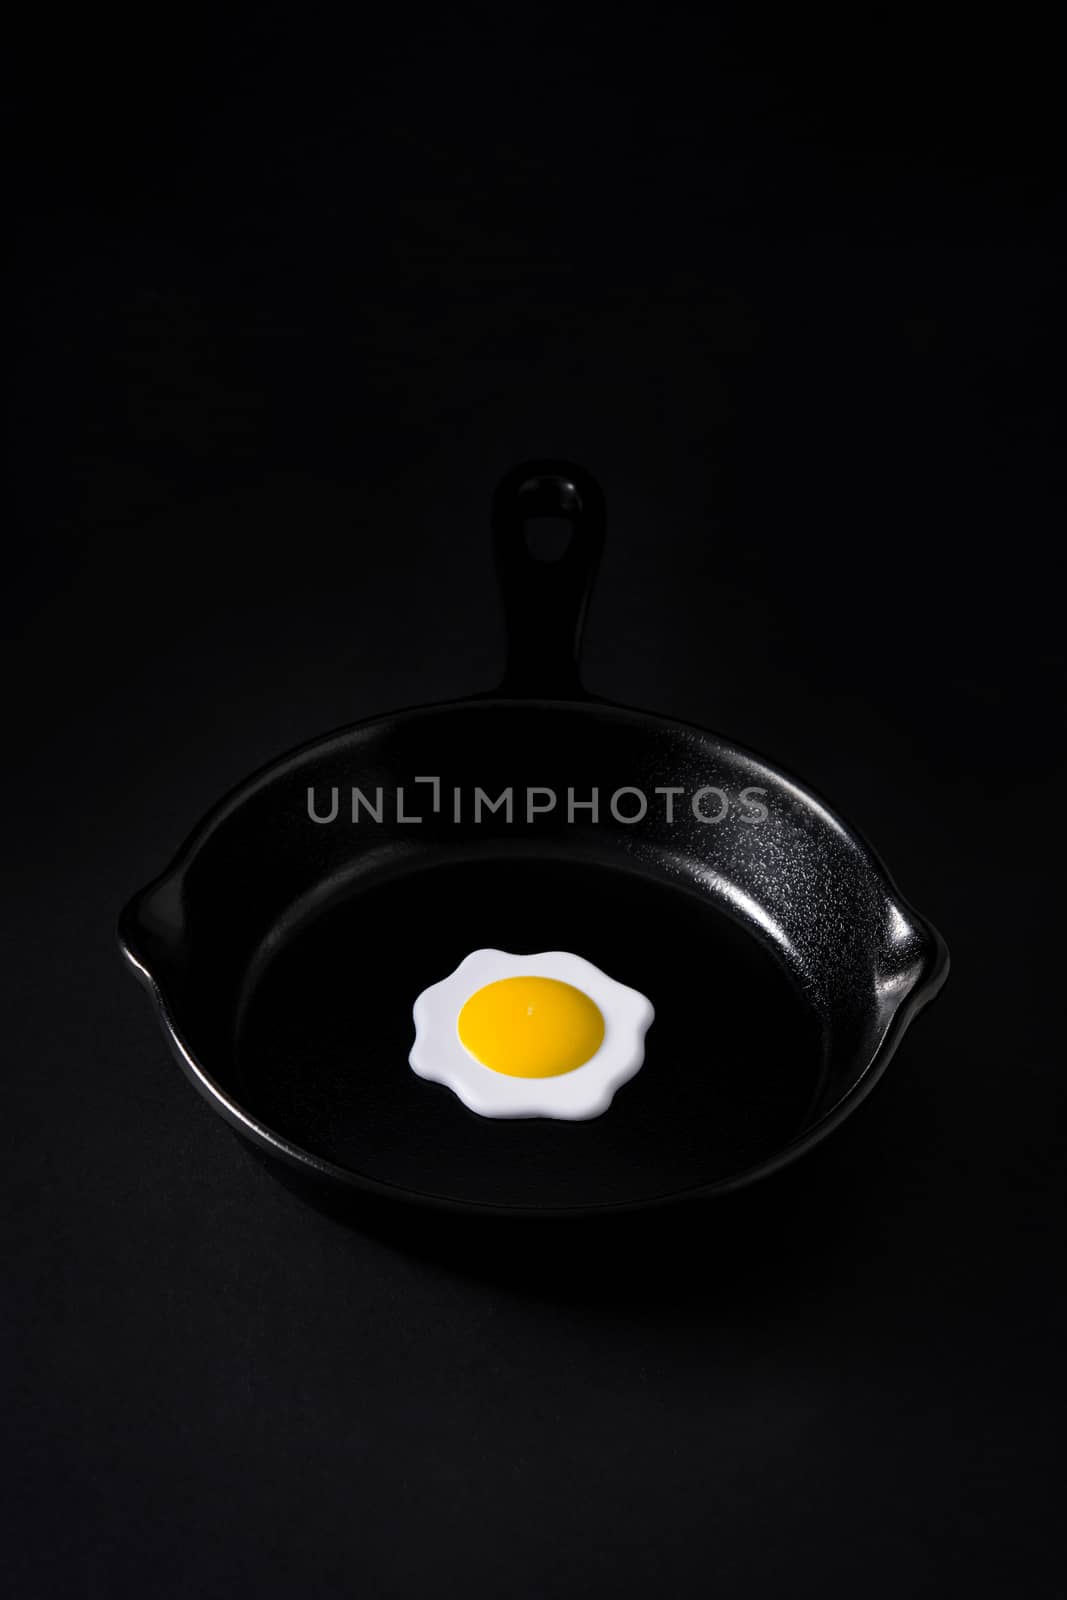 Black frying pan with egg inside by chandlervid85